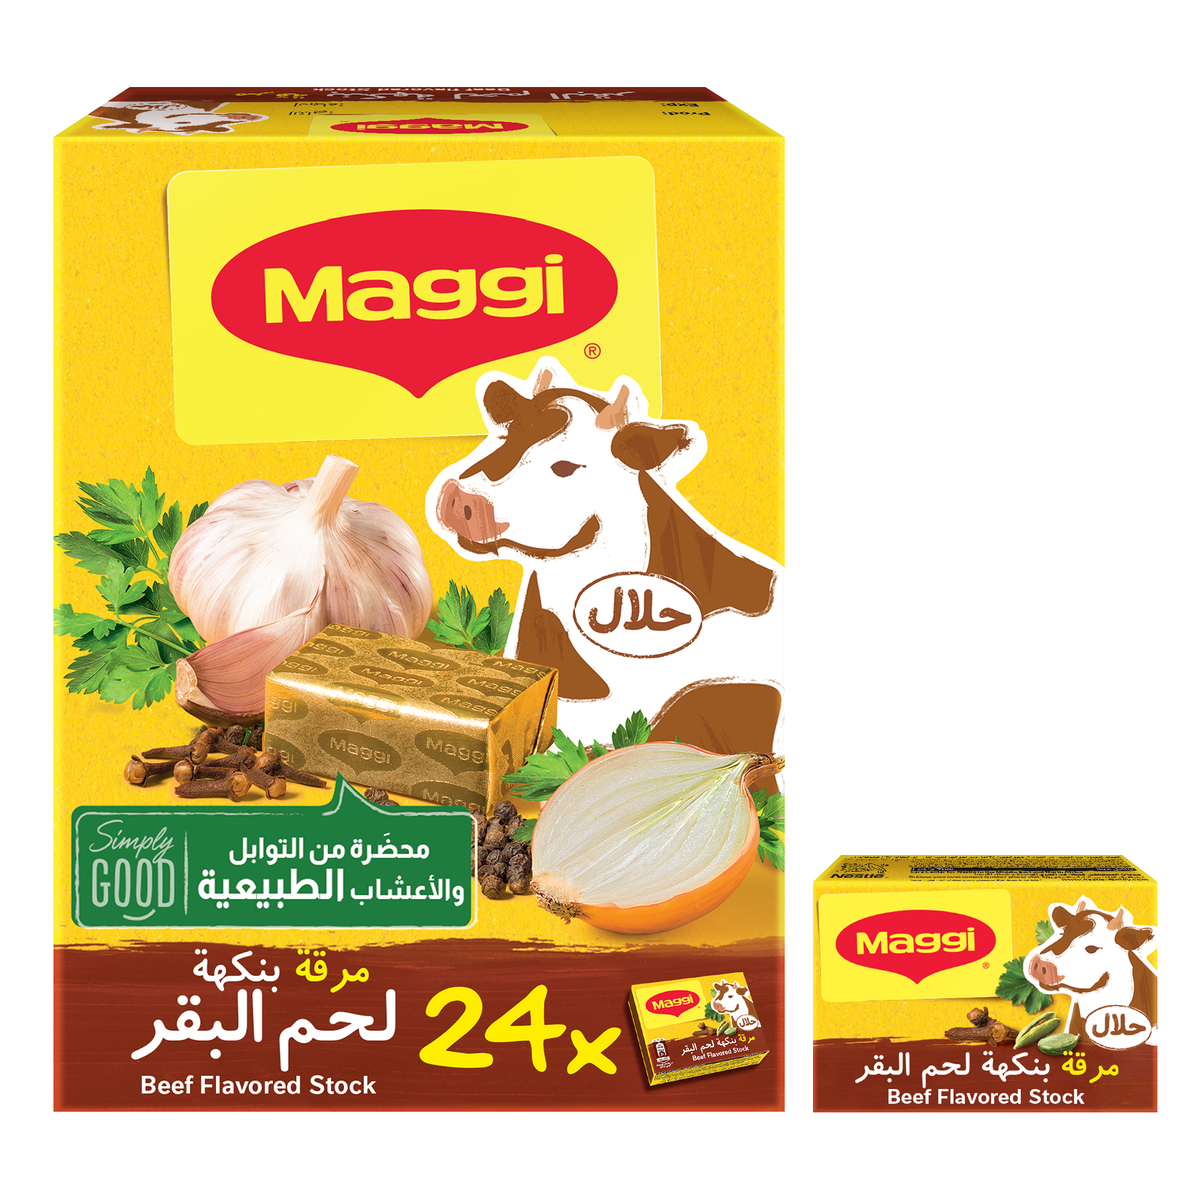 Maggi Beef Flavored Stock 24 x 18g